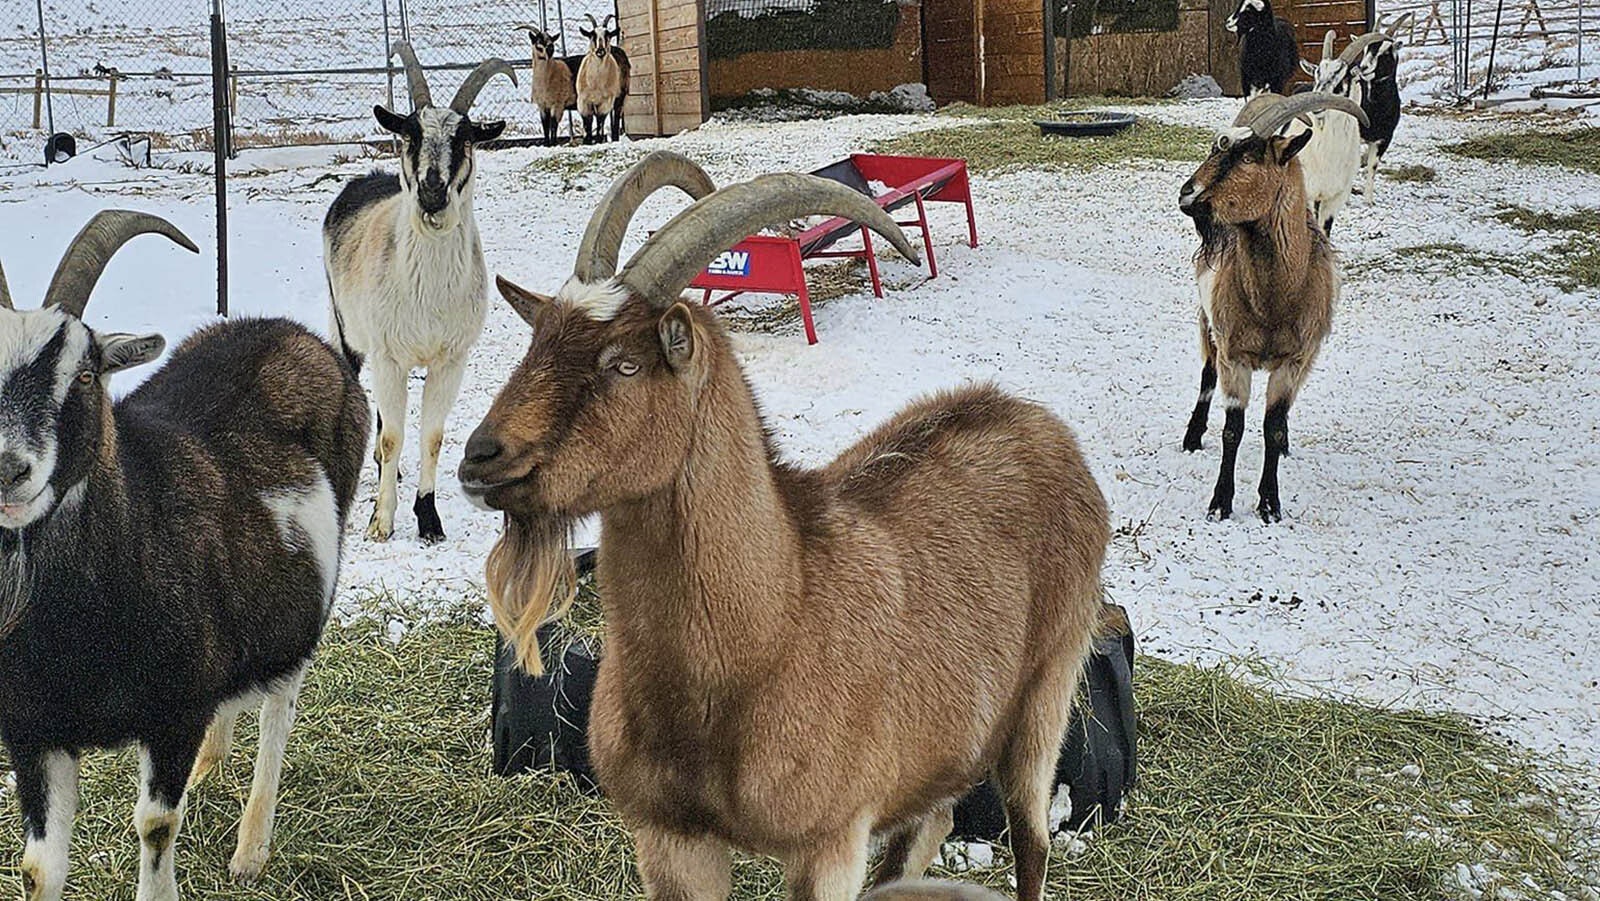 Pack goats can be a godsend for hunters and other backcountry enthusiasts.